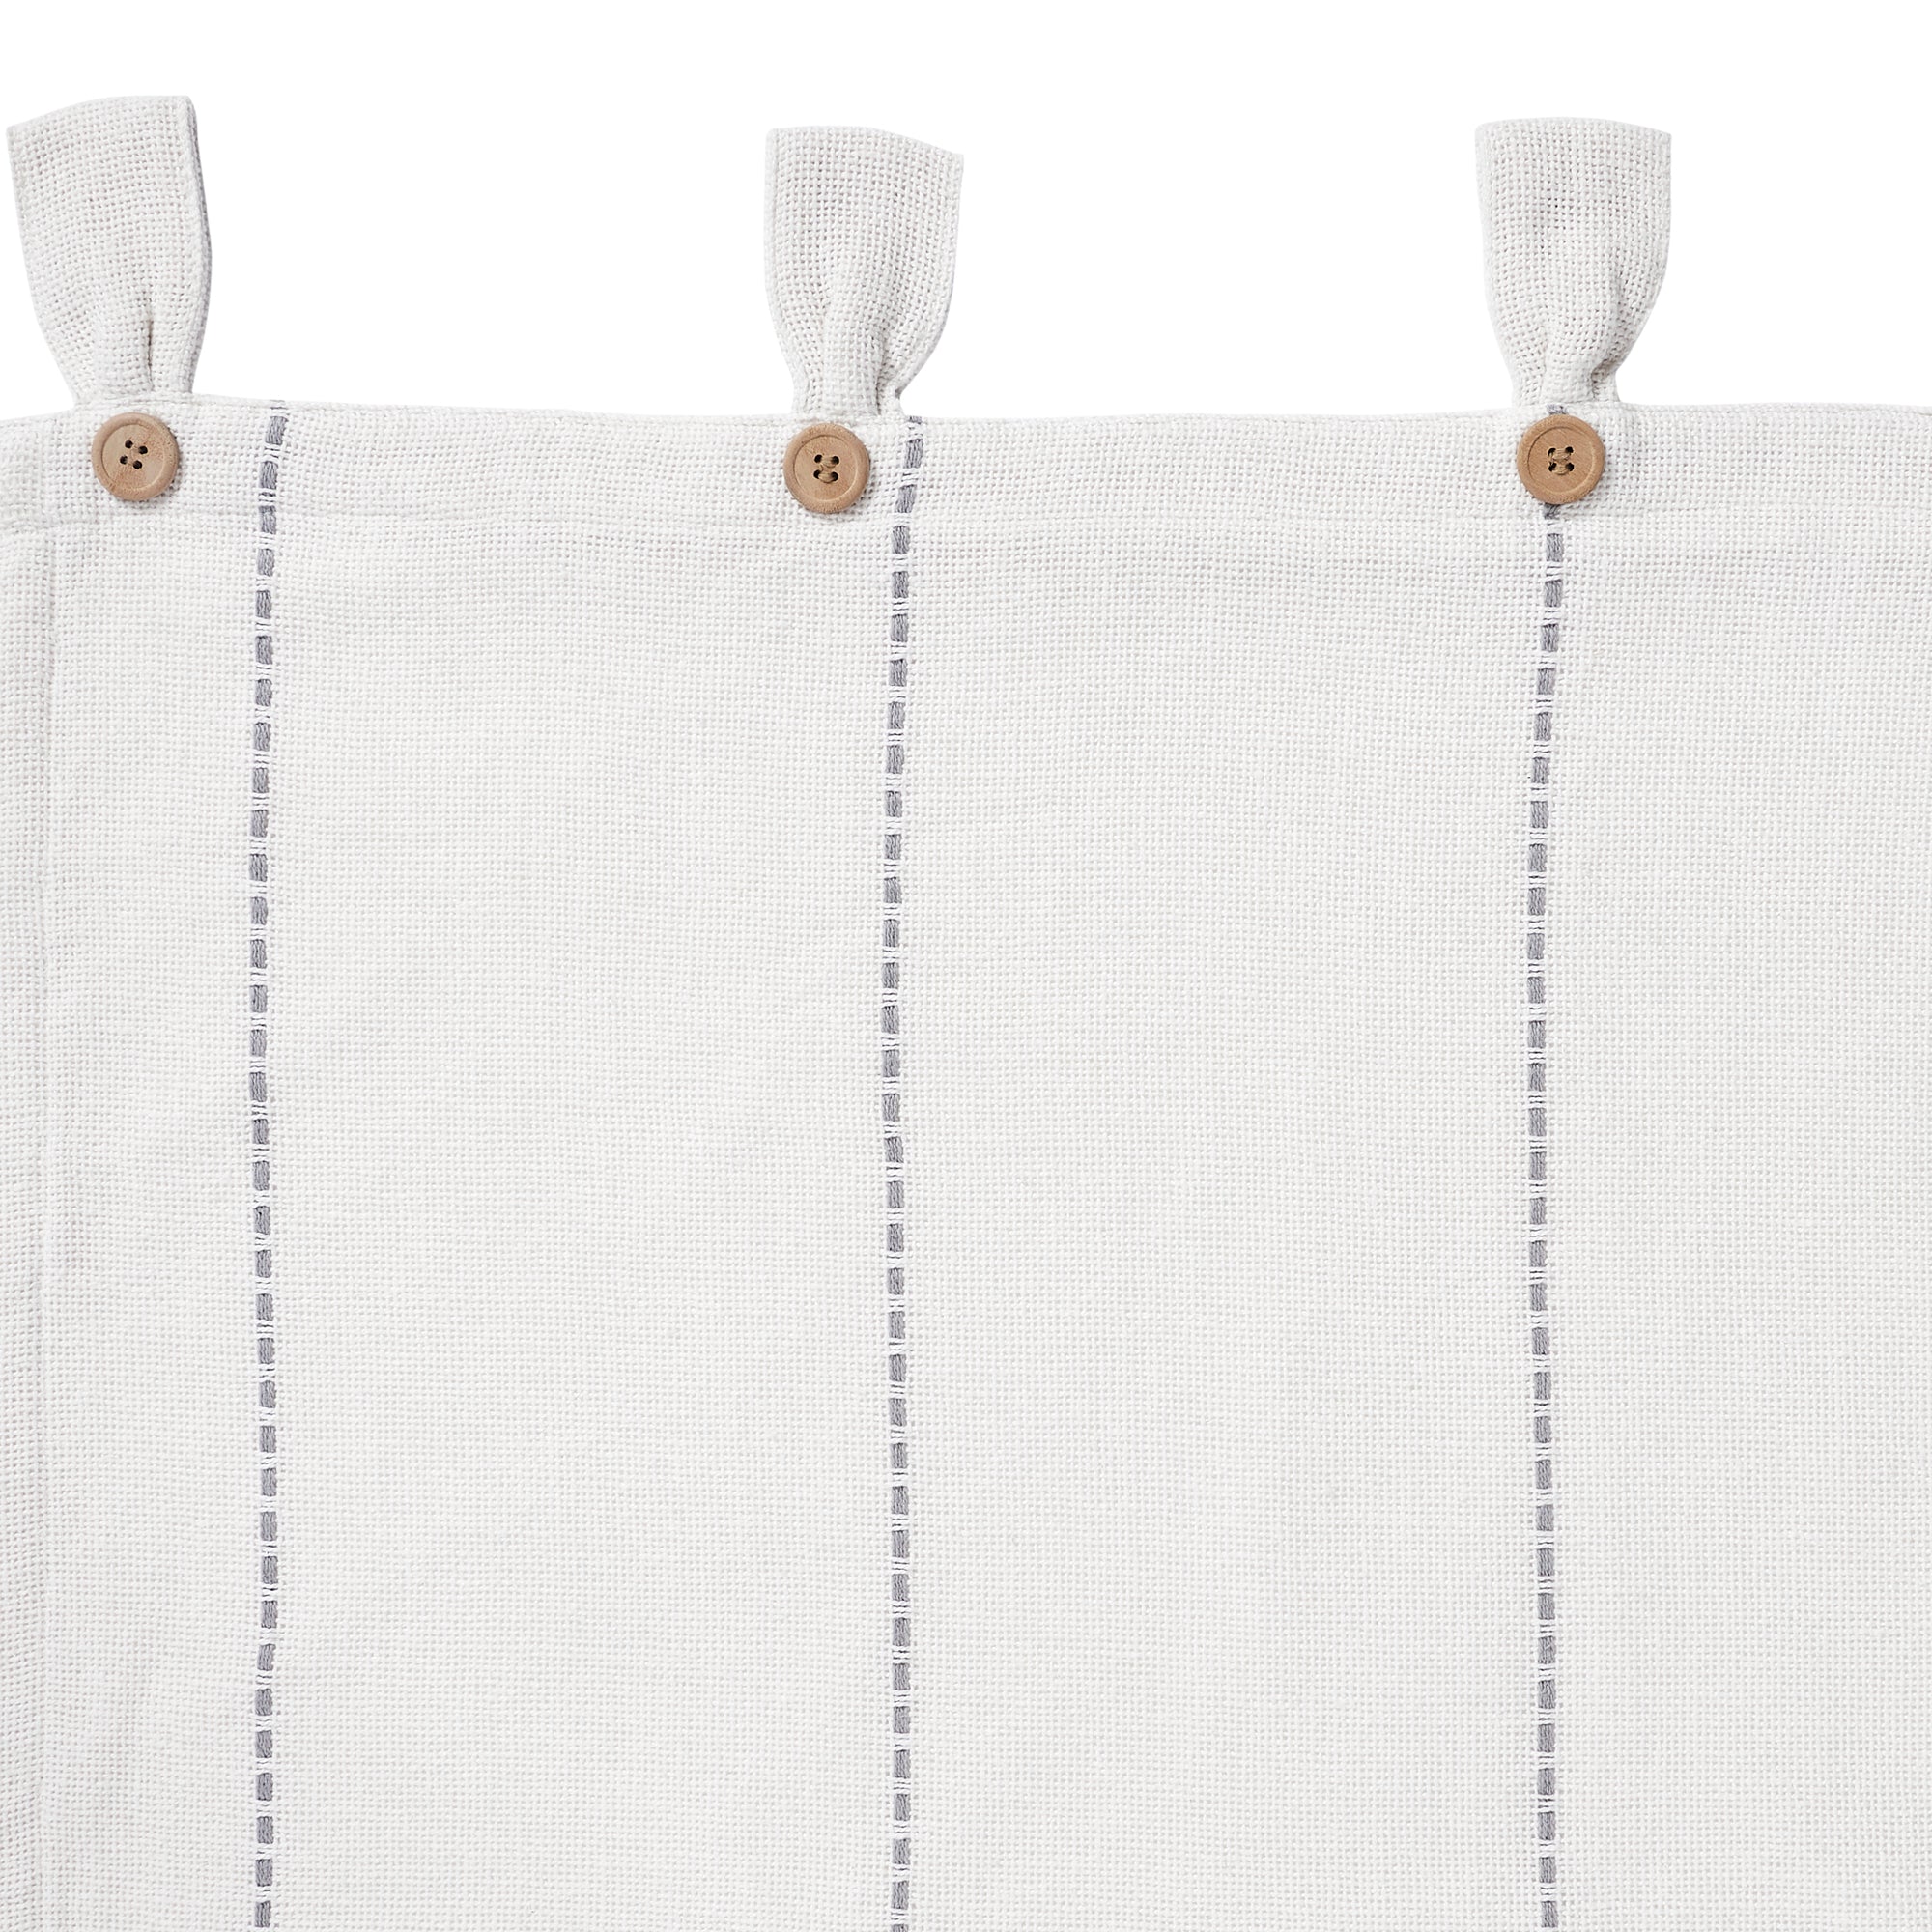 Stitched Burlap White Panel Curtain Set of 2 84x40 VHC Brands